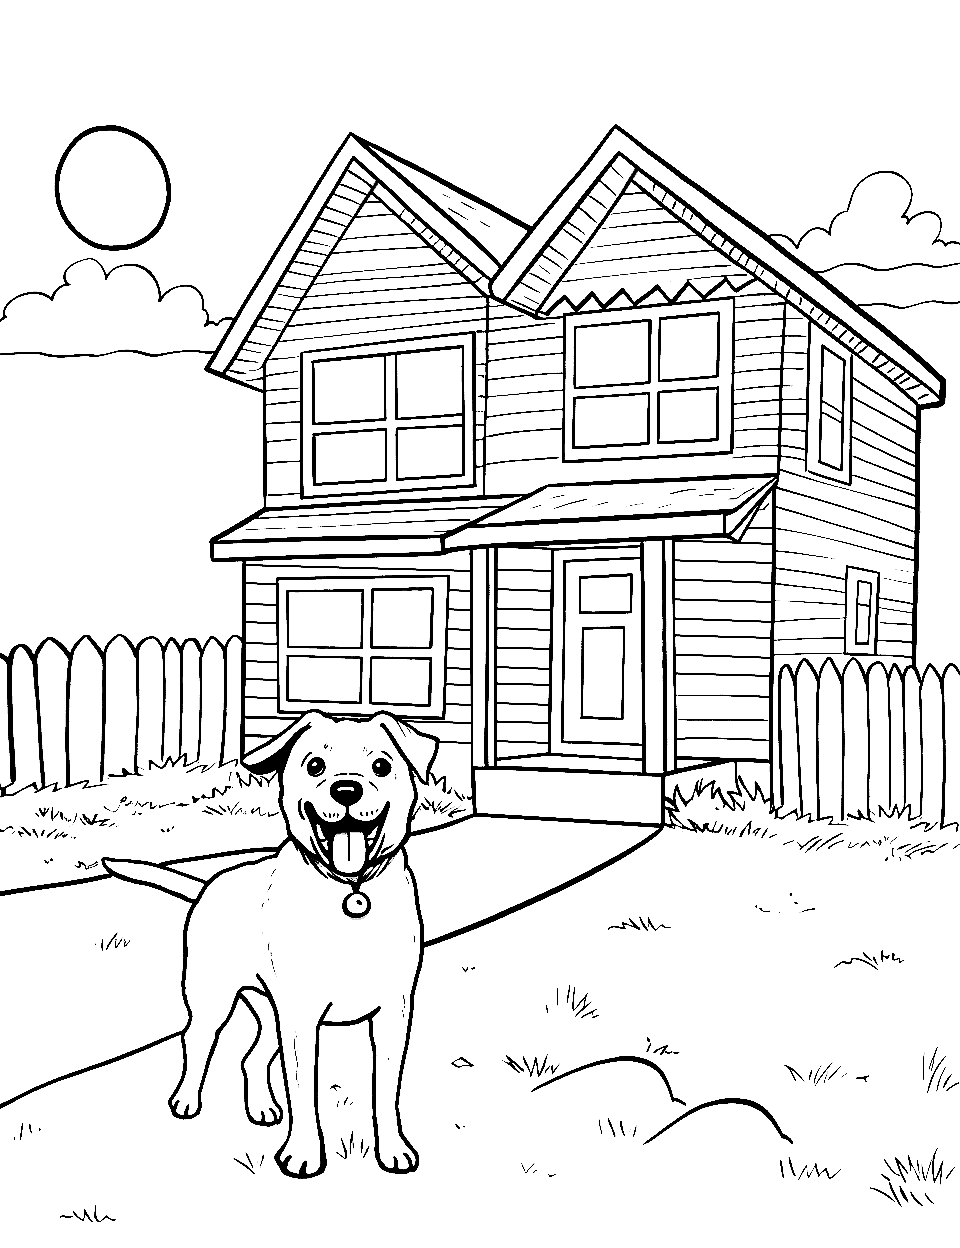 Joyful Dog in the Yard Coloring Page - A happy dog playing in front of a simple suburban house.